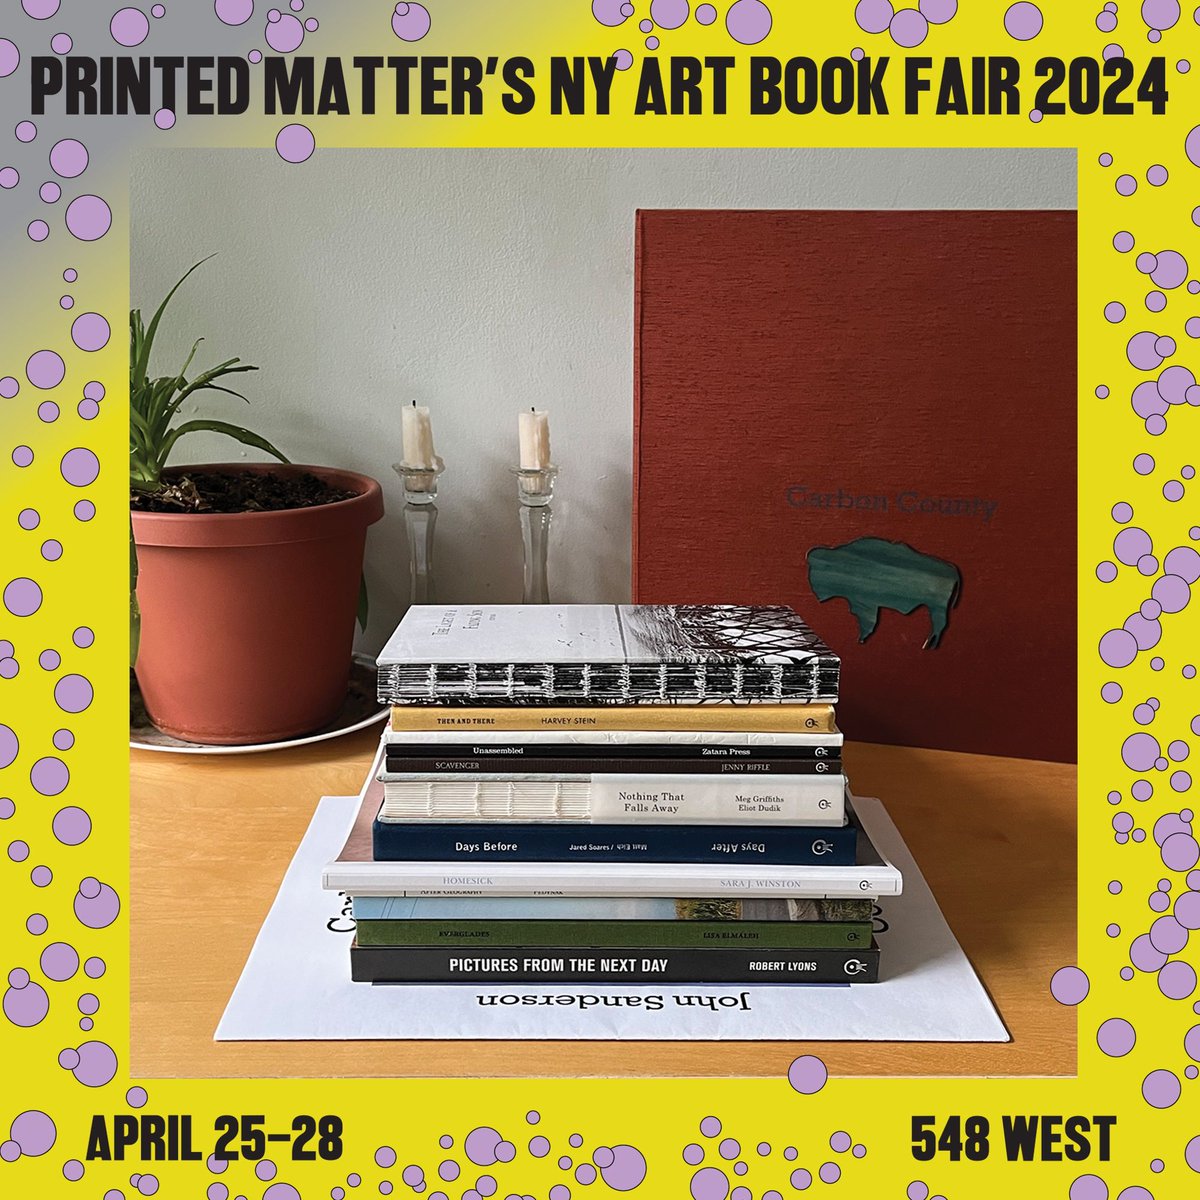 Tomorrow is the first day of NY Art Book Fair, come say hi during opening night from 6pm-9pm.  ZP will be at table F14.

#photobookjousting #photobook #photobooks #artbook #artbooks #fineartphotography #documentaryphotography #NYABF #NYABF24 #NYABF2024 #NYArtBookFair